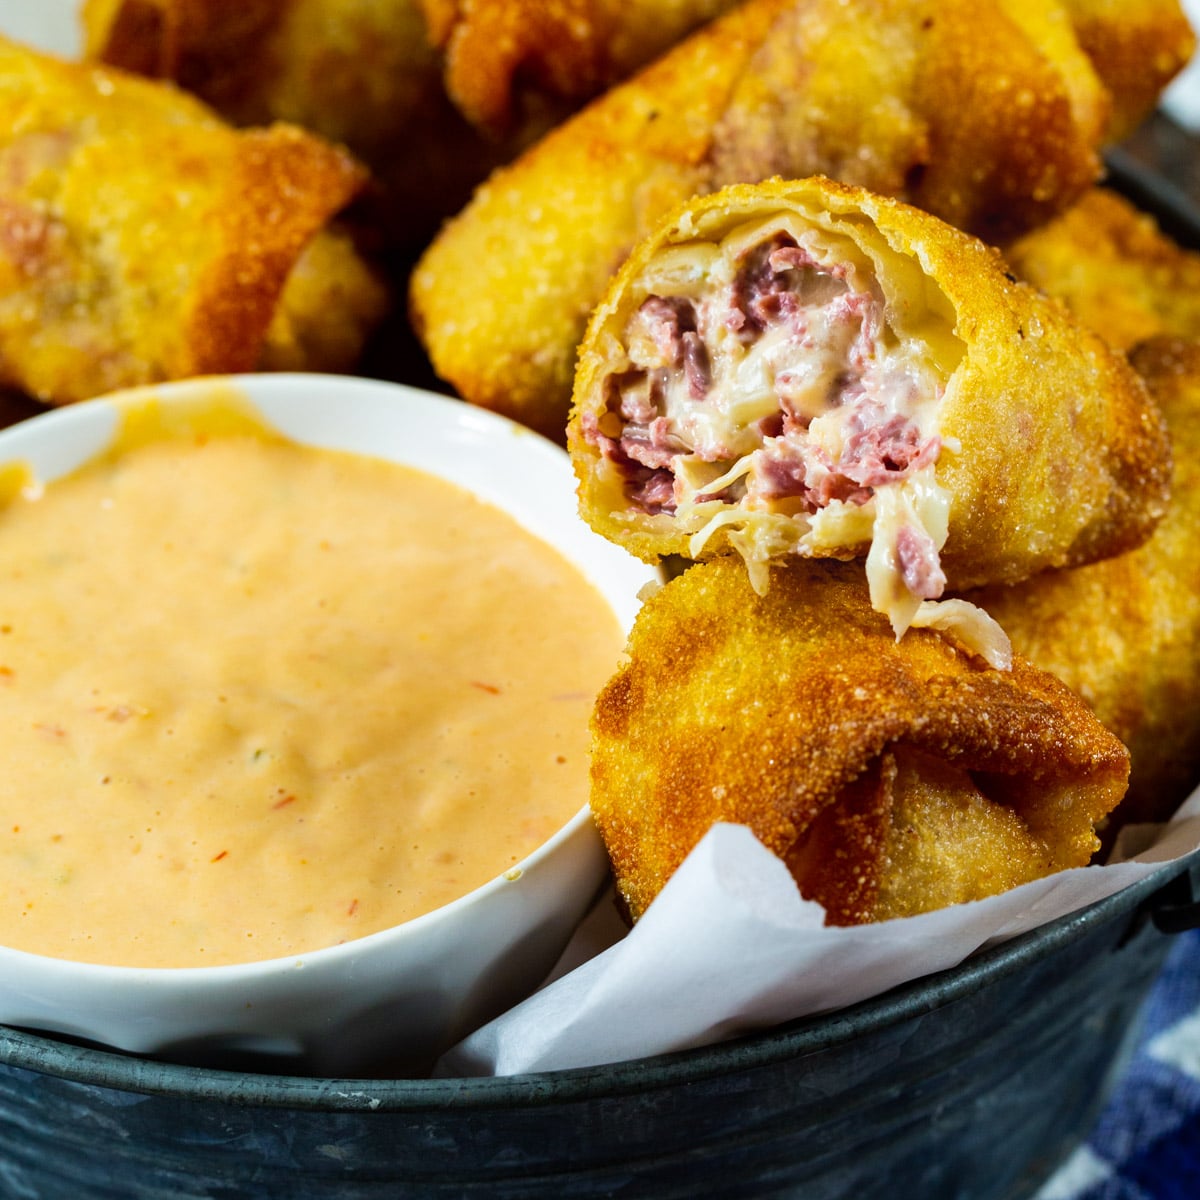 Reuben Egg Rolls with bowl full of Thousand Island Dressing.